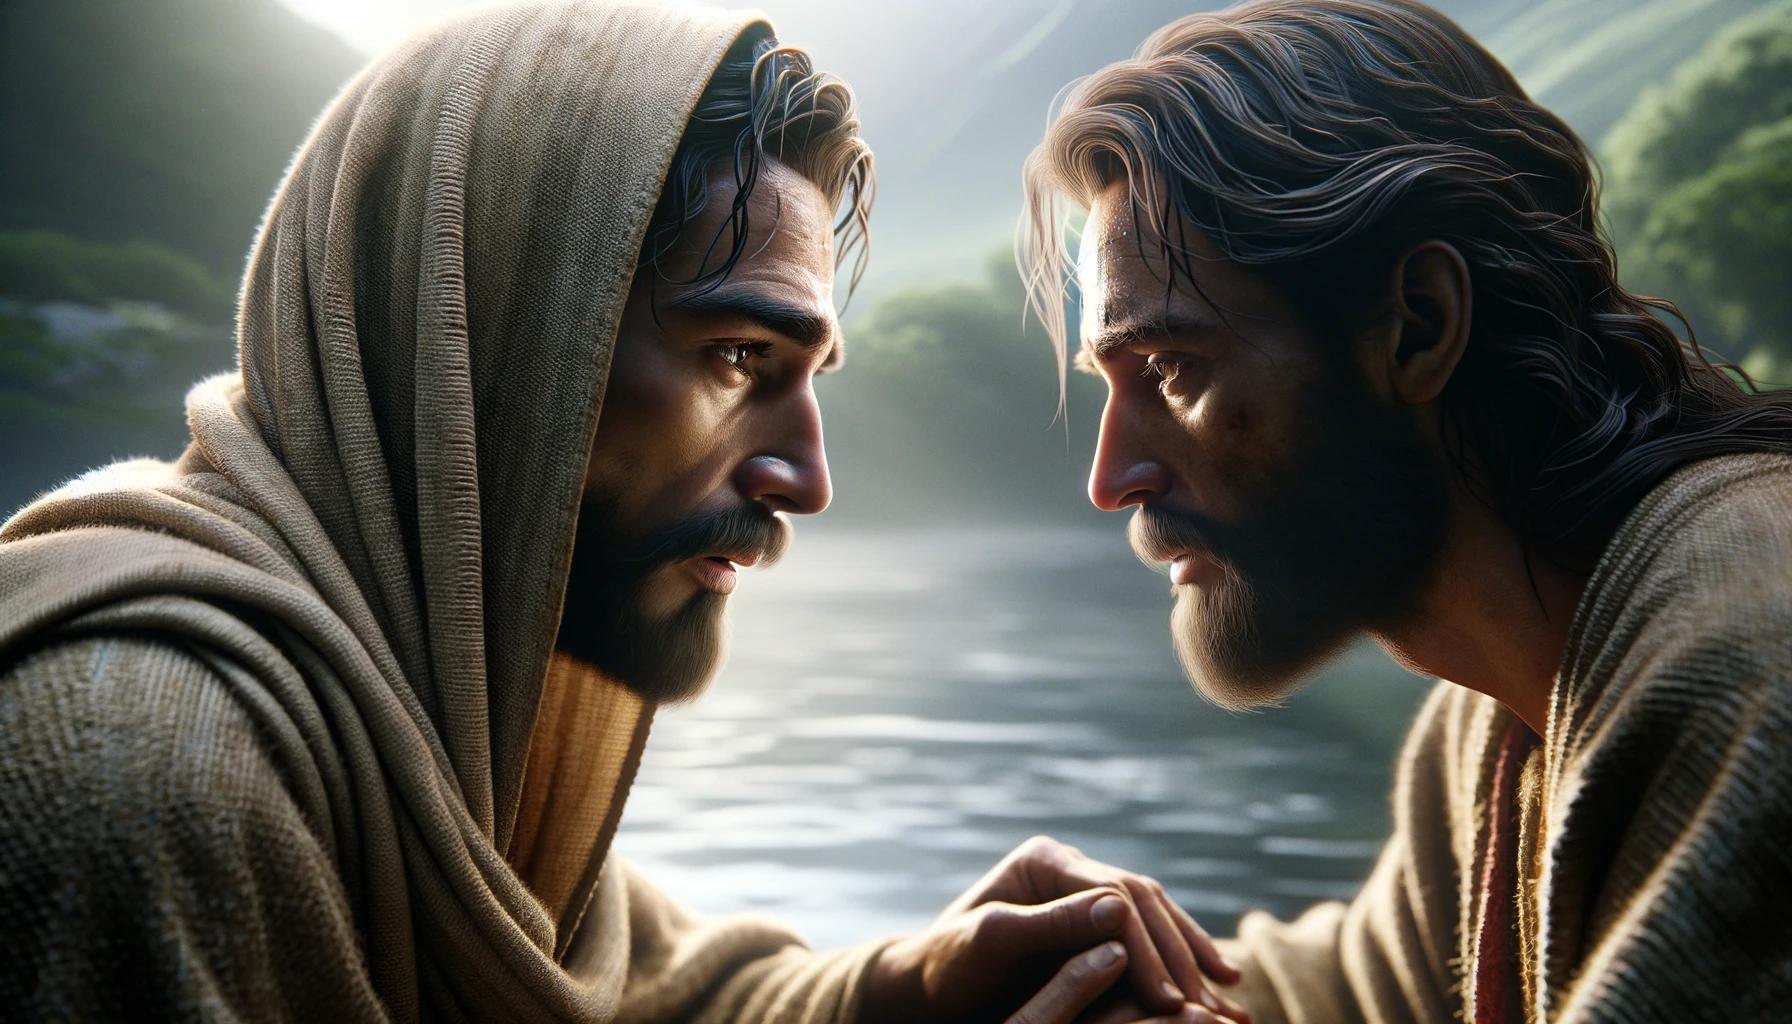 How Old Was Jesus When John The Baptist Baptized Him